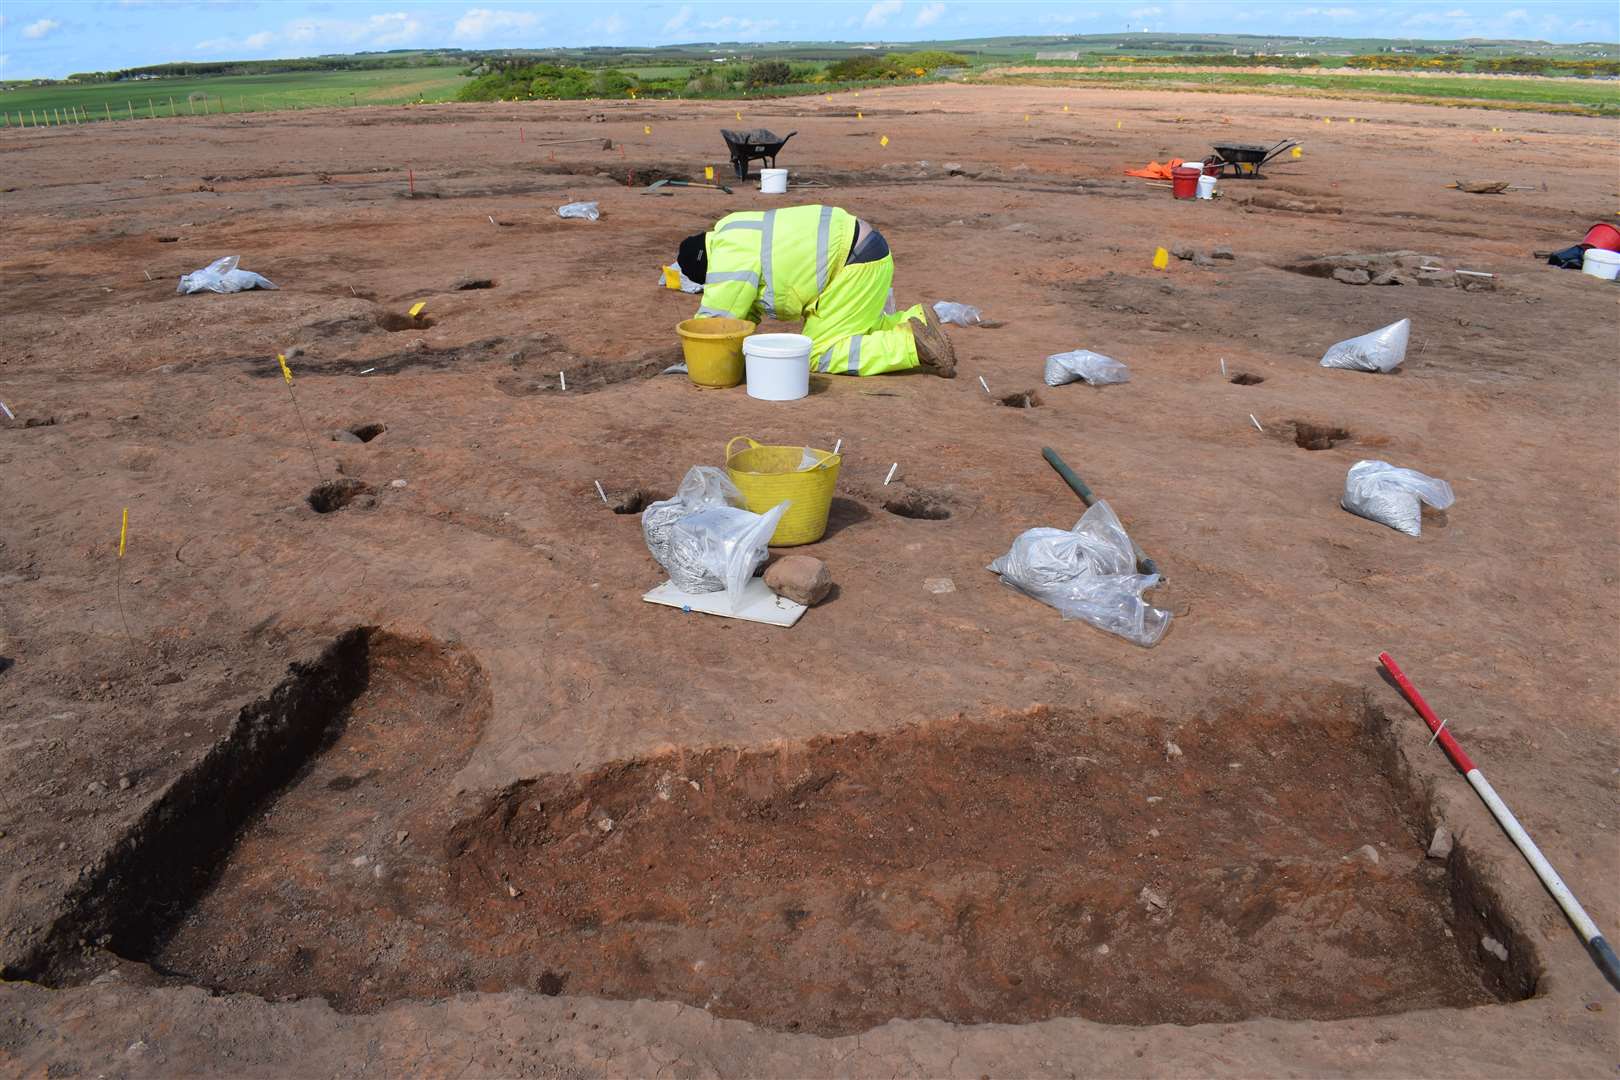 Settlement finds at Cruden Bay date back to the Iron Age